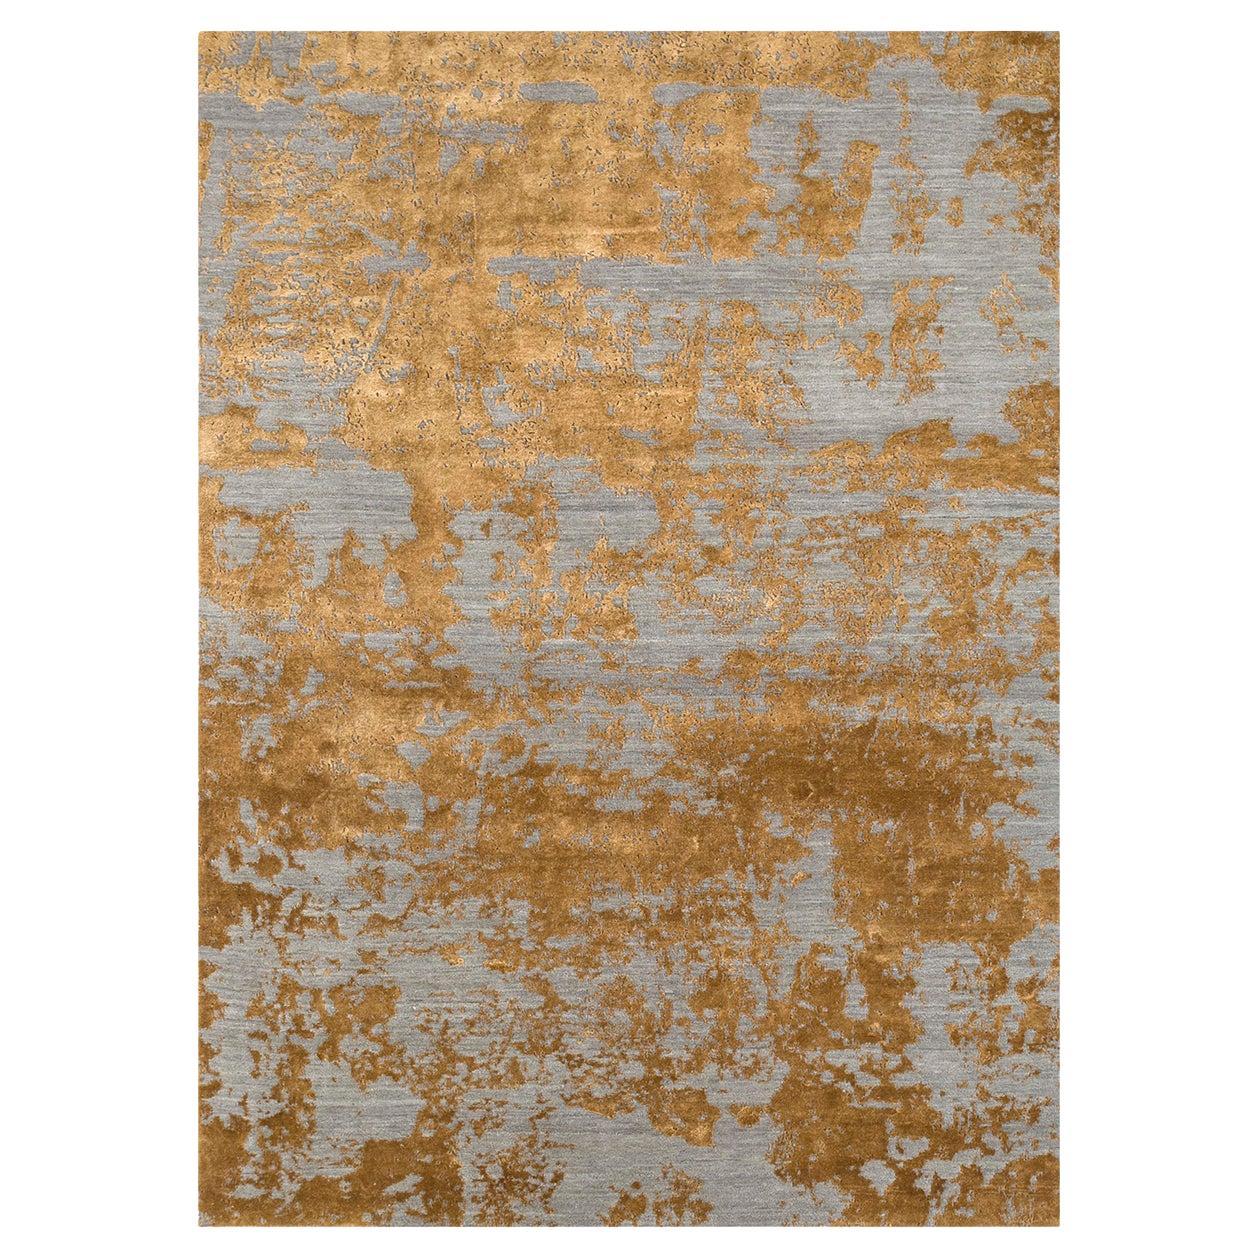 Flake Rug by Rural Weavers, Knotted, Wool, Bamboo Silk, 300x420cm For Sale